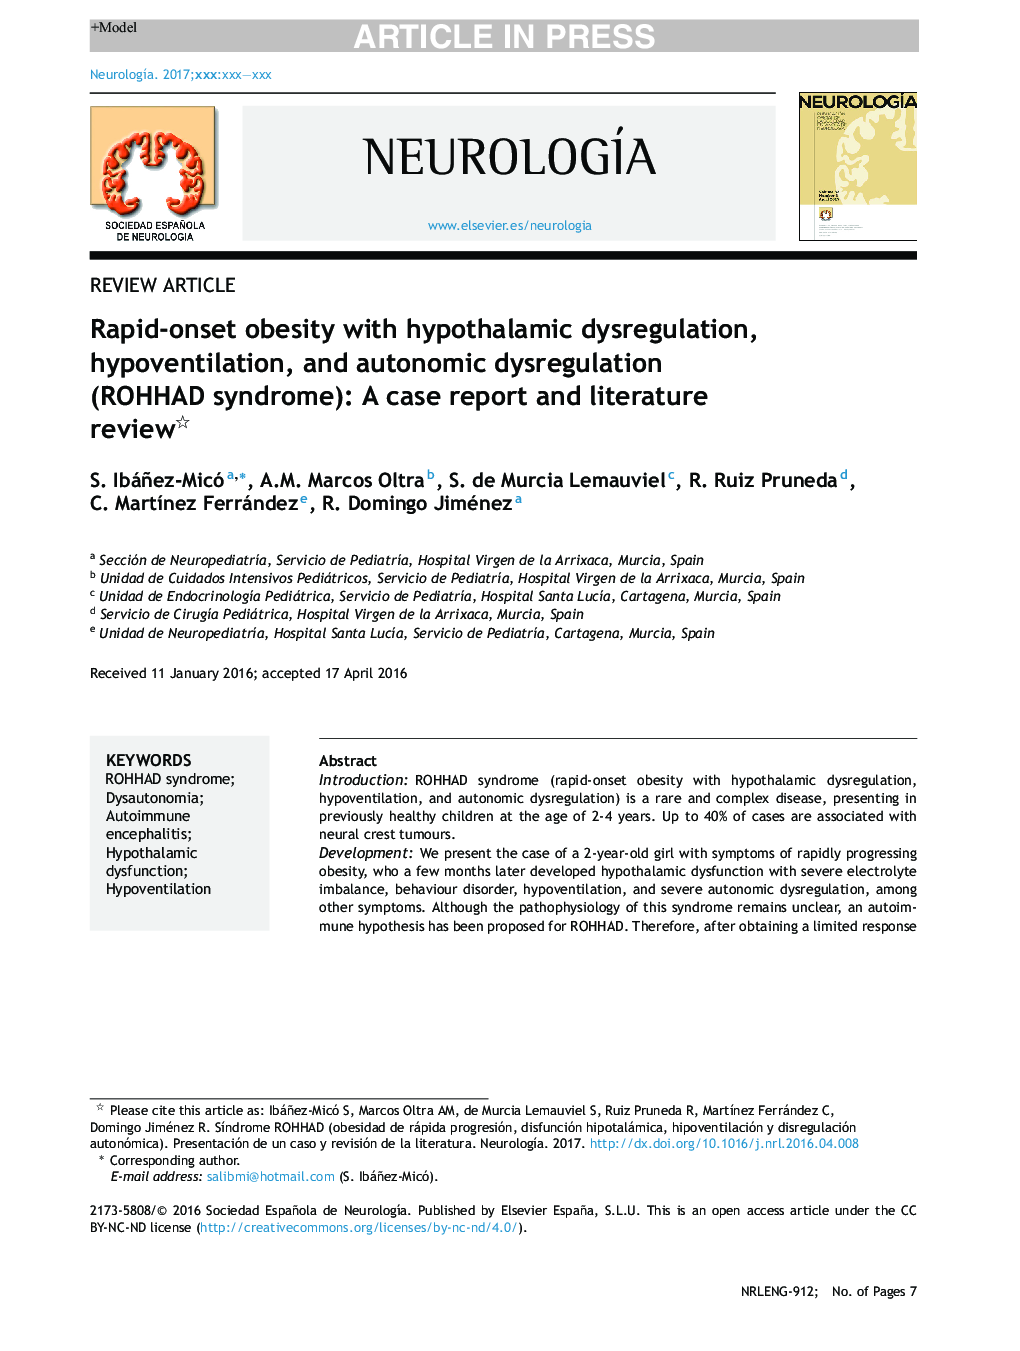 Rapid-onset obesity with hypothalamic dysregulation, hypoventilation, and autonomic dysregulation (ROHHAD syndrome): A case report and literature review